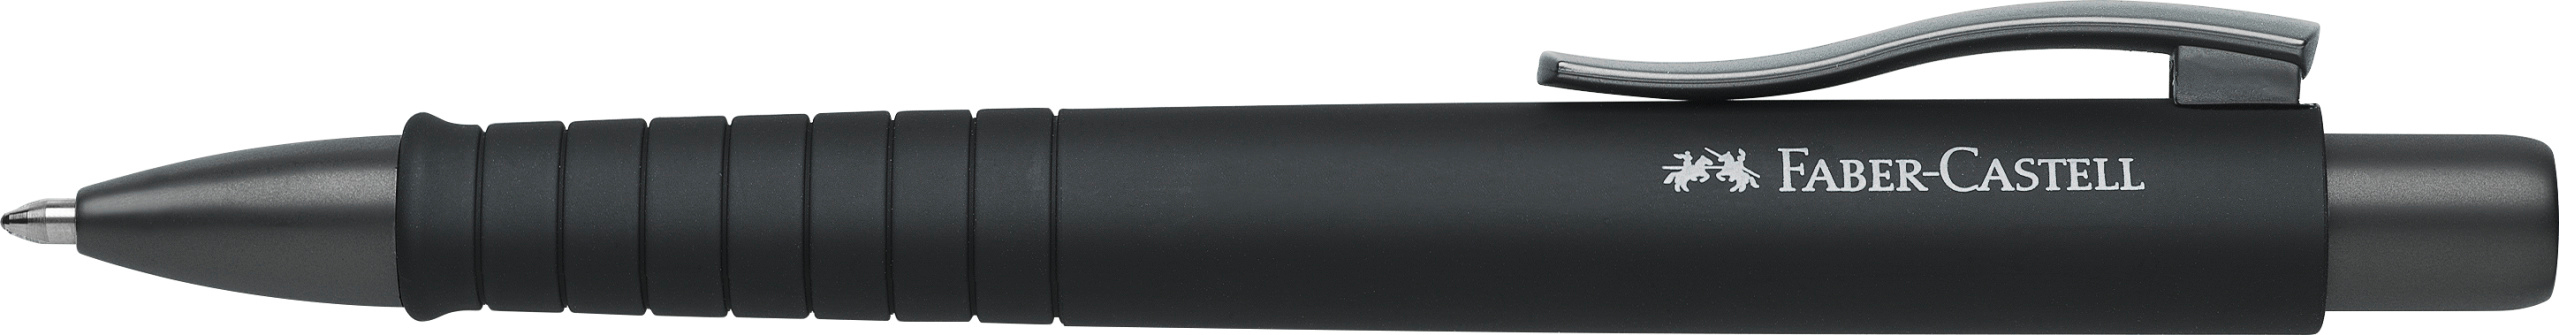 FABER-CASTELL Stylo à bille POLY BALL XB 241190 All Black